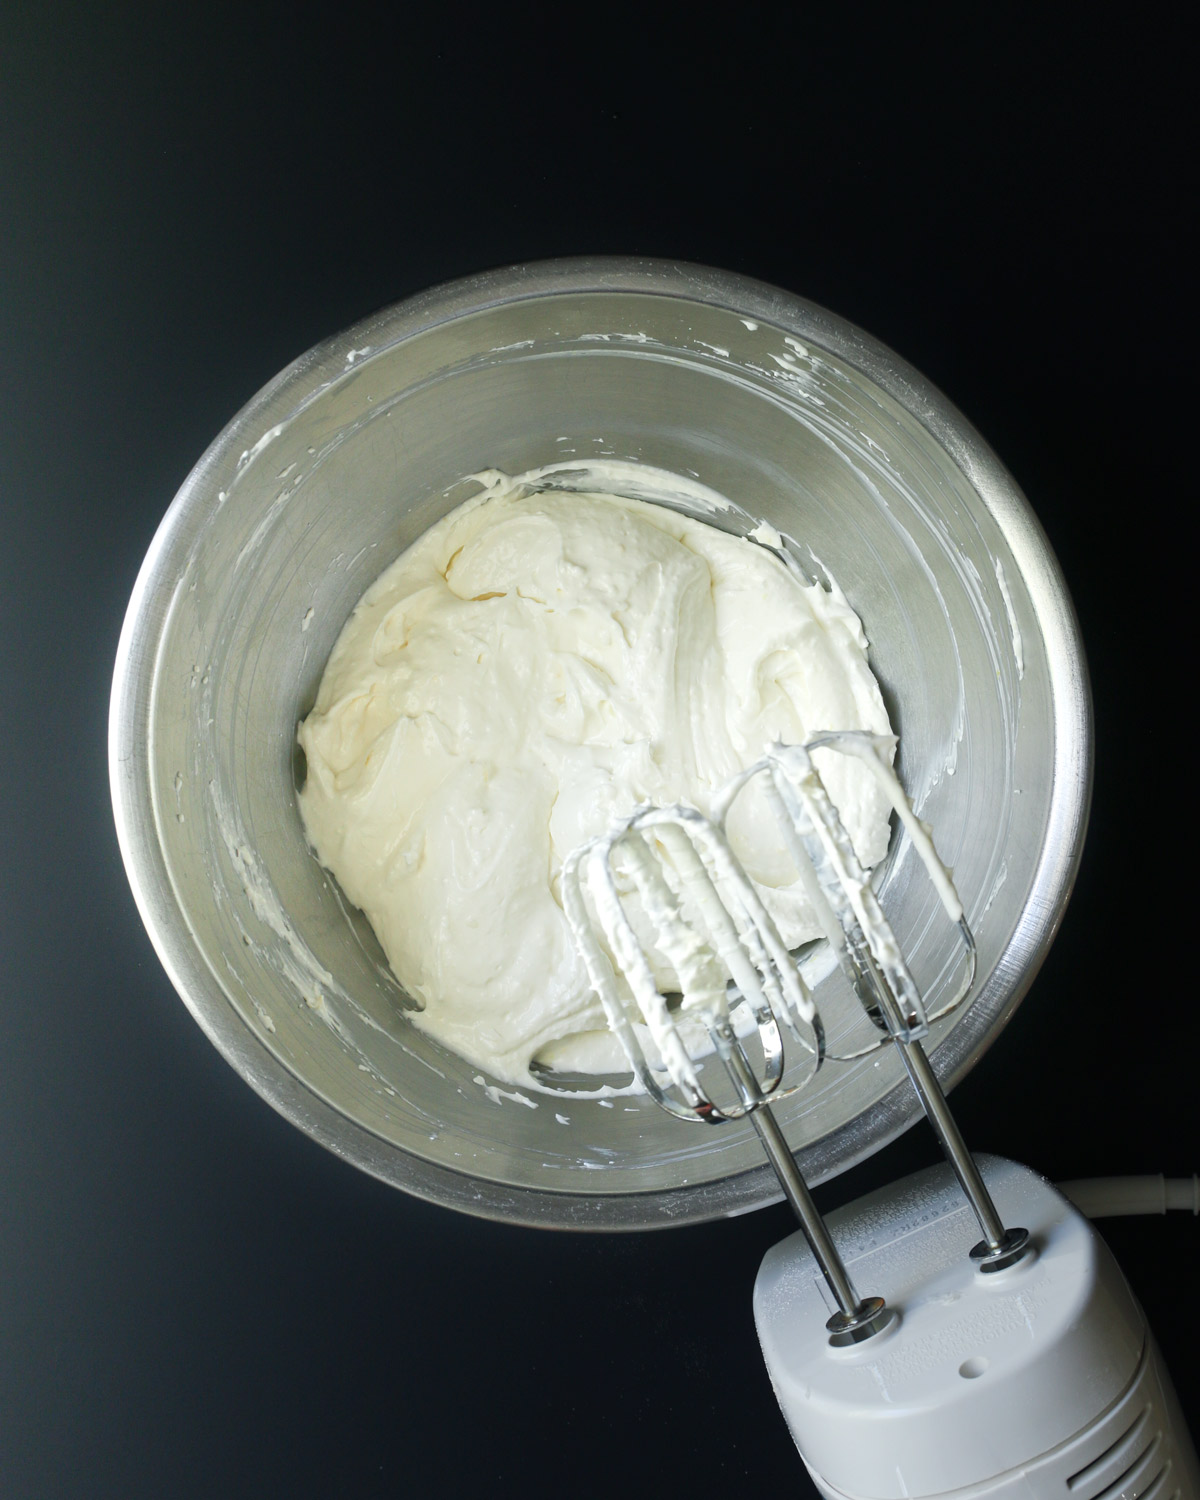 whipped mixture in mixing bowl and hand mixer.